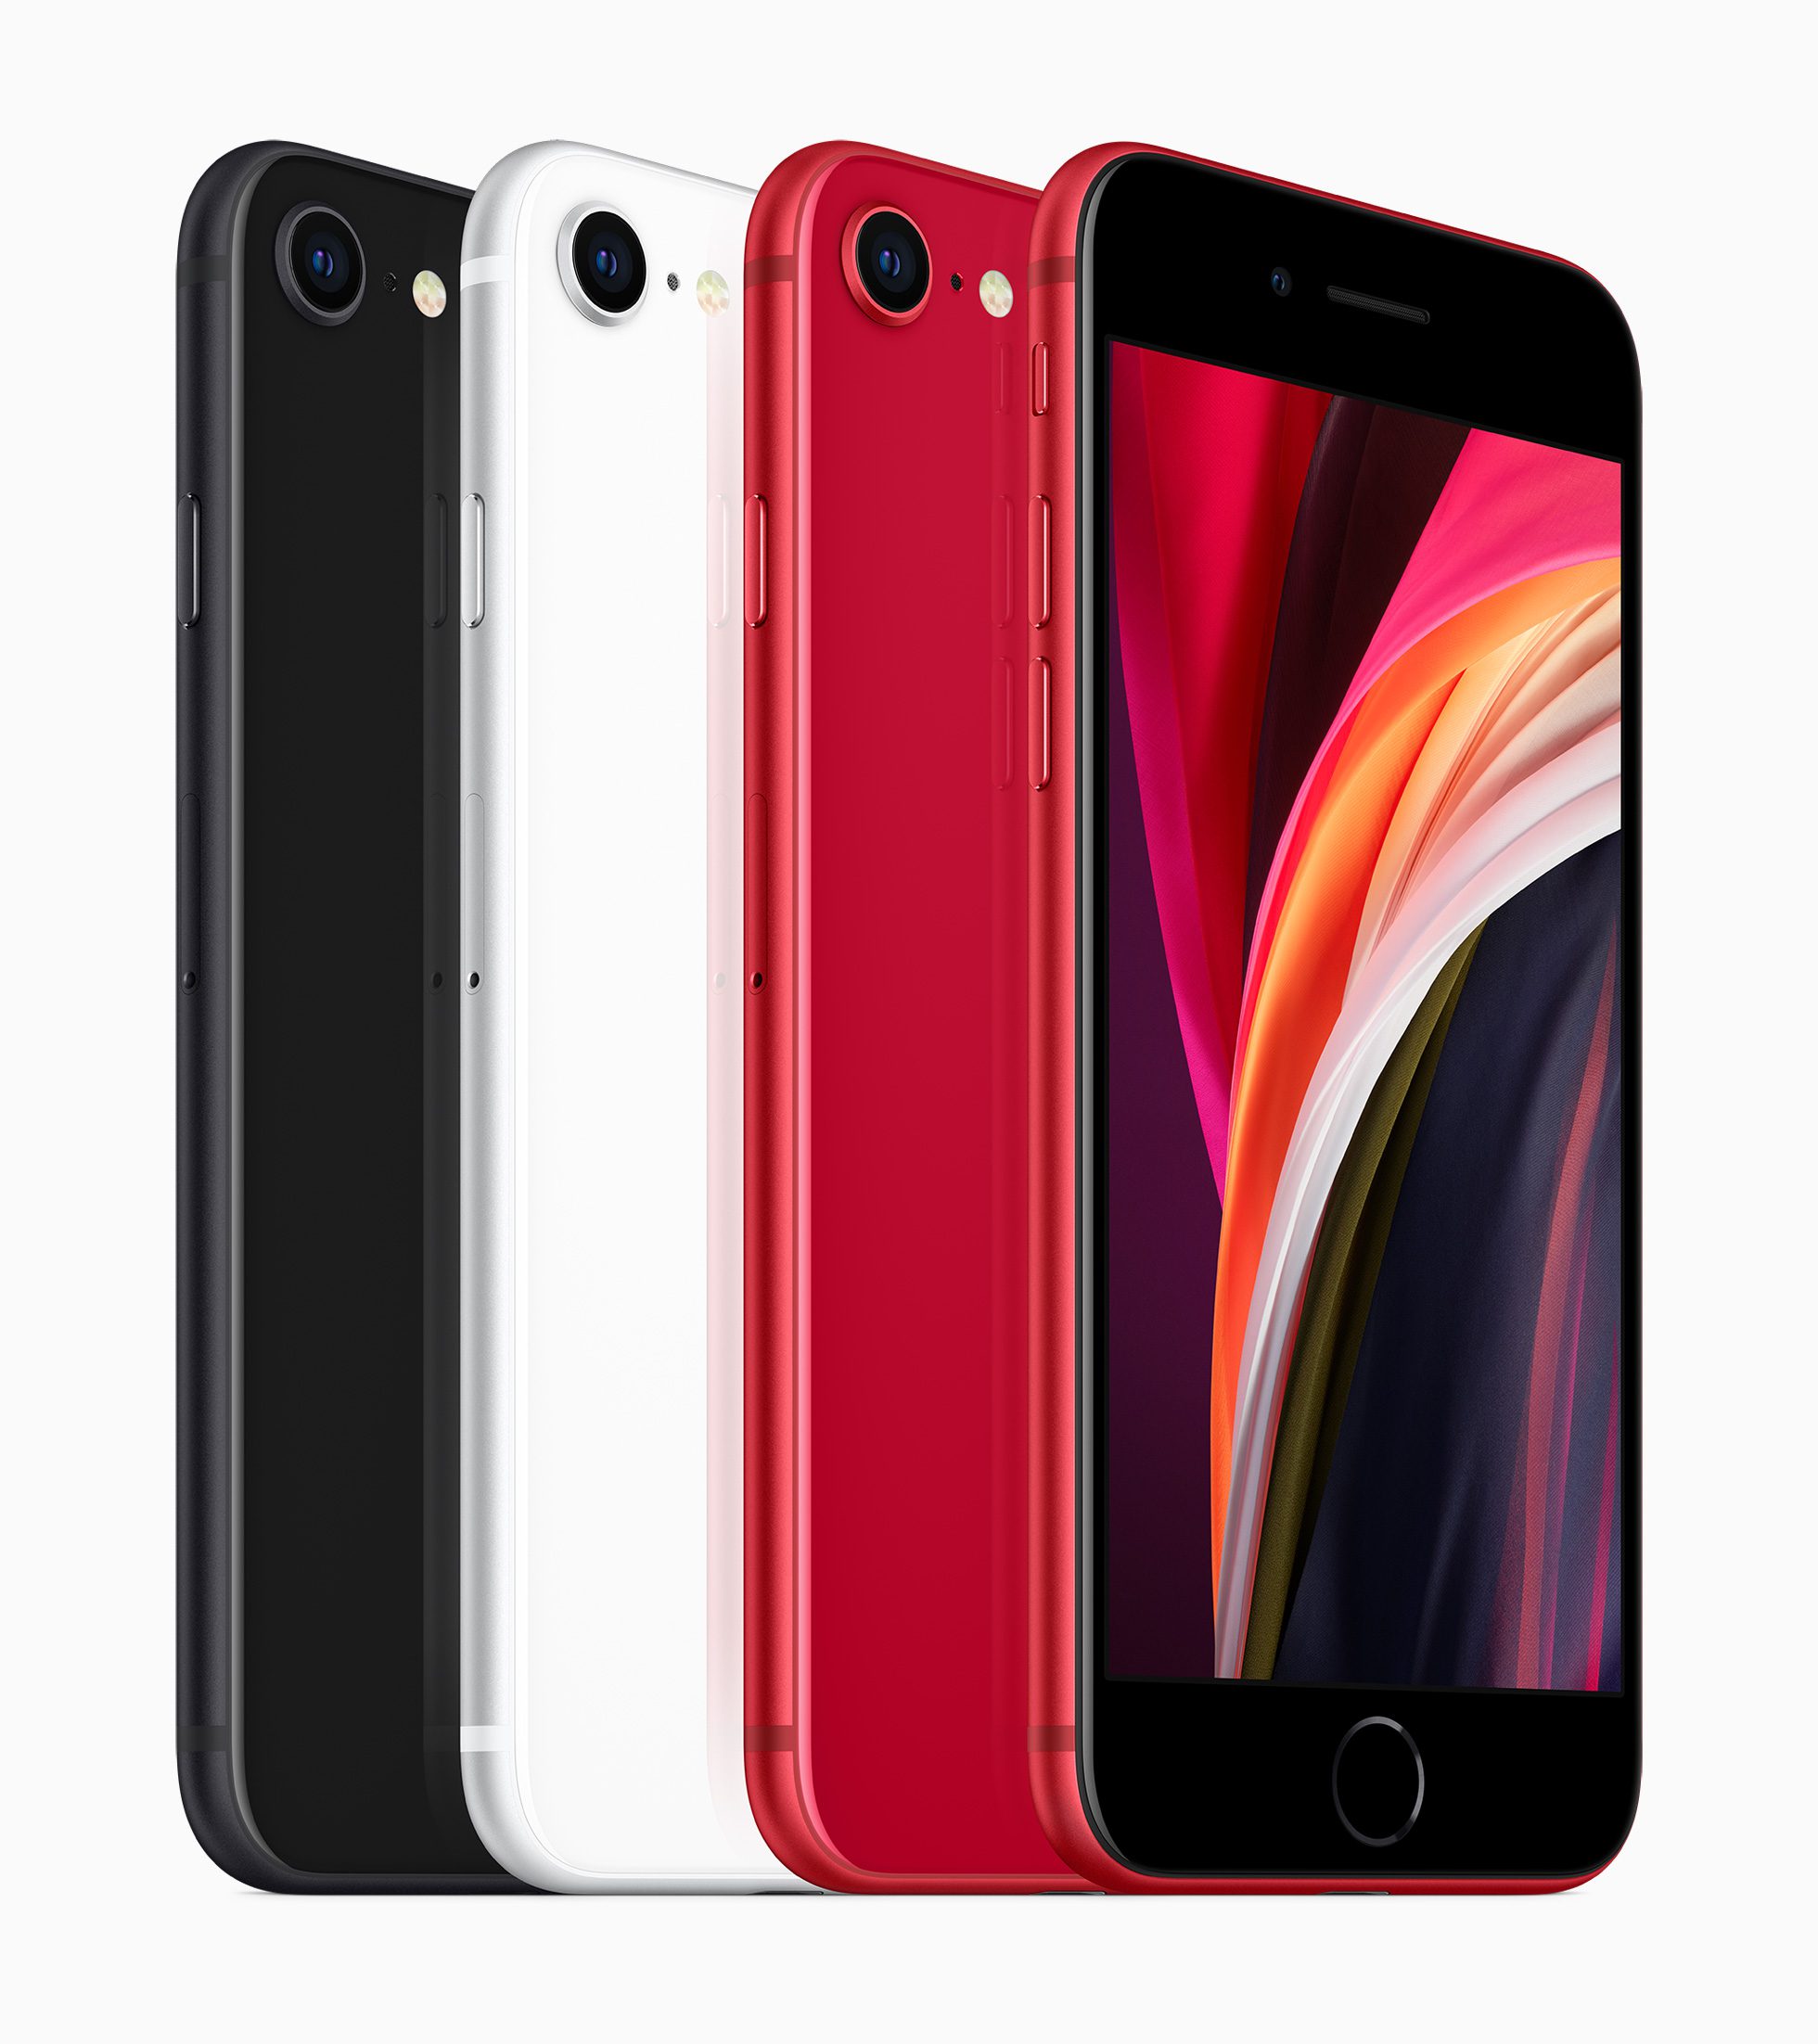 Apple_new-iphone-se-black-white-product-red-colors_04152020 - Techweez